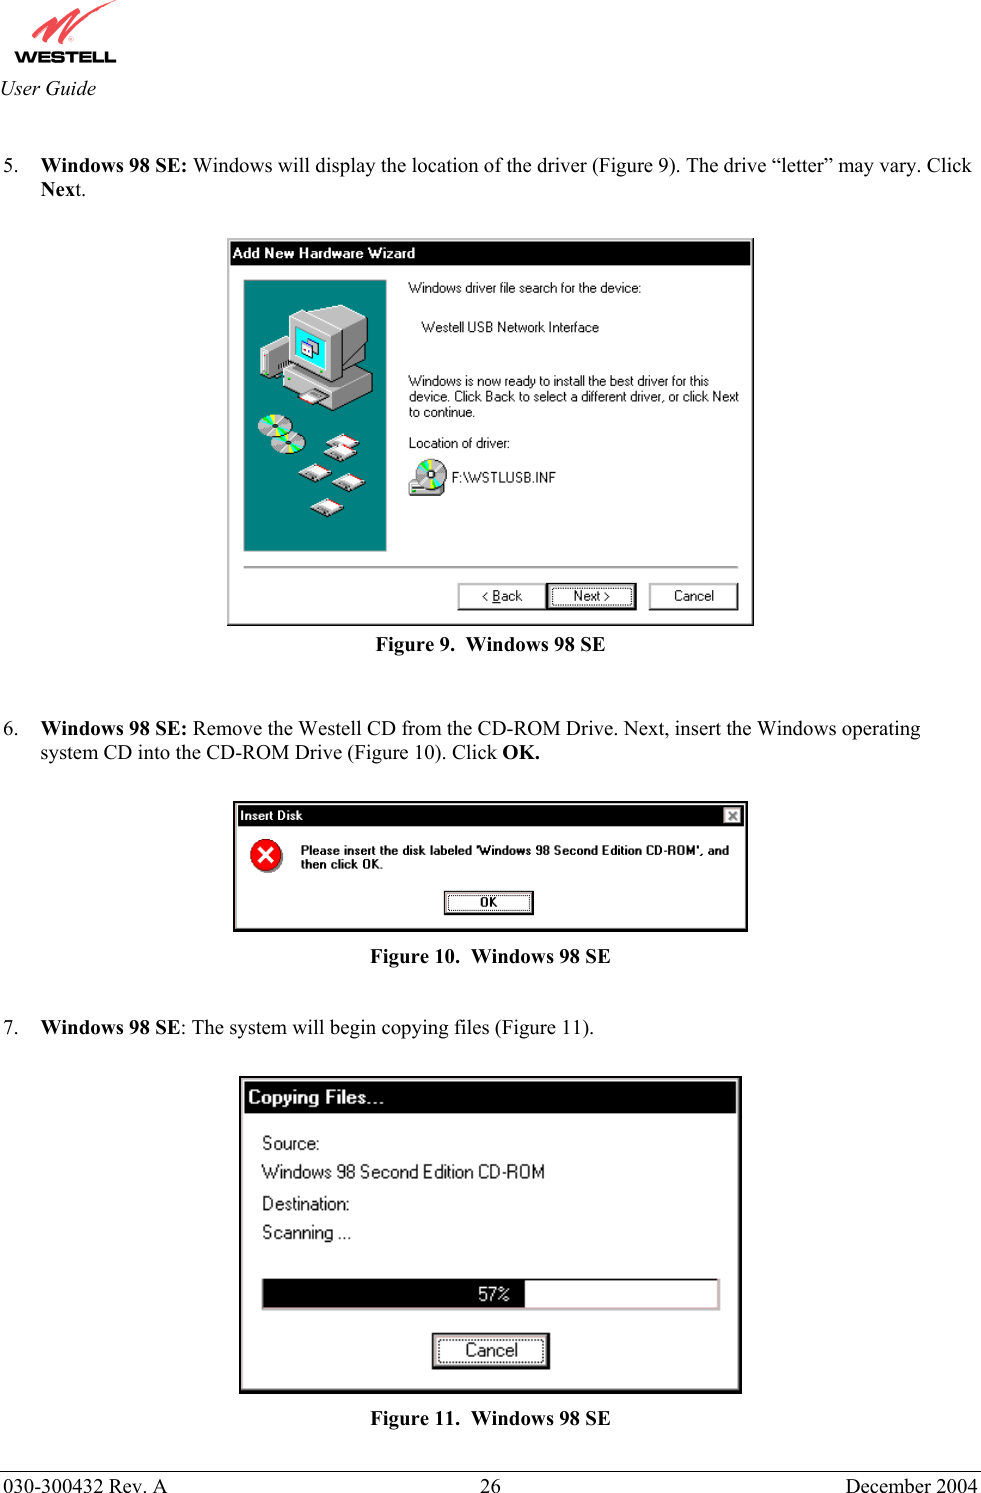       030-300432 Rev. A  26 December 2004  User Guide  5.  Windows 98 SE: Windows will display the location of the driver (Figure 9). The drive “letter” may vary. Click Next.   Figure 9.  Windows 98 SE   6.  Windows 98 SE: Remove the Westell CD from the CD-ROM Drive. Next, insert the Windows operating system CD into the CD-ROM Drive (Figure 10). Click OK.   Figure 10.  Windows 98 SE  7.  Windows 98 SE: The system will begin copying files (Figure 11).   Figure 11.  Windows 98 SE  